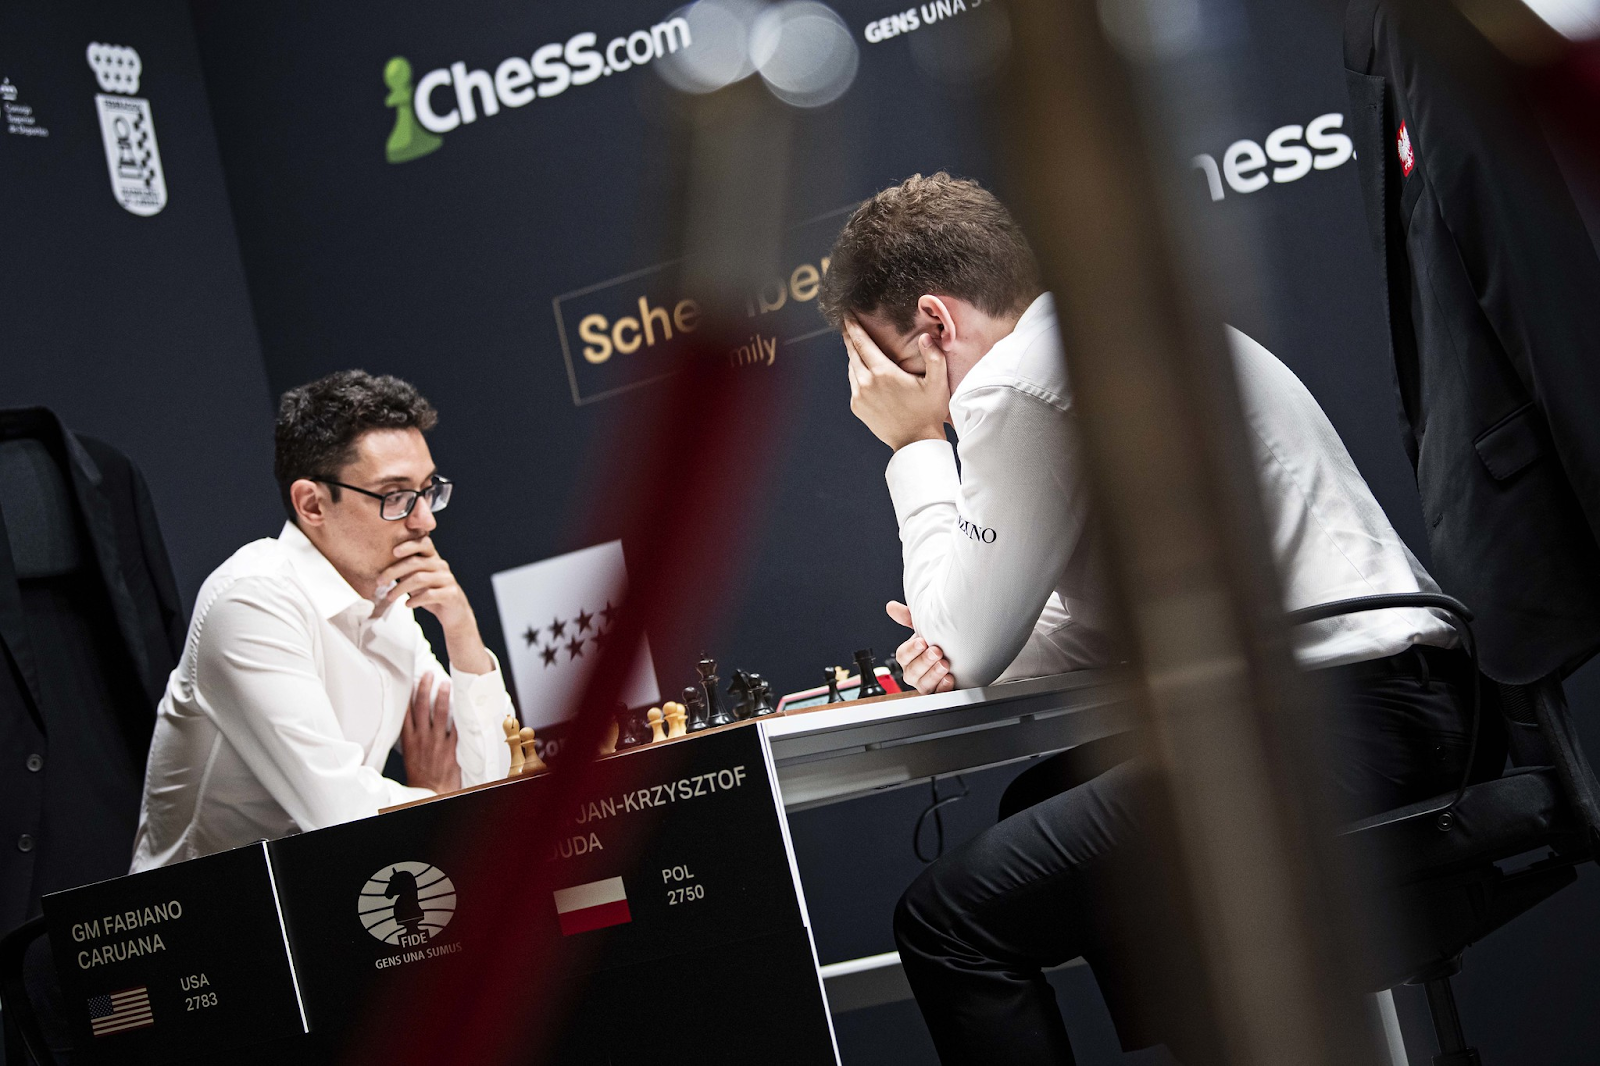 2022 FIDE Candidates, Can Hikaru or Ding Pull Ahead In CLEAR Second Place?